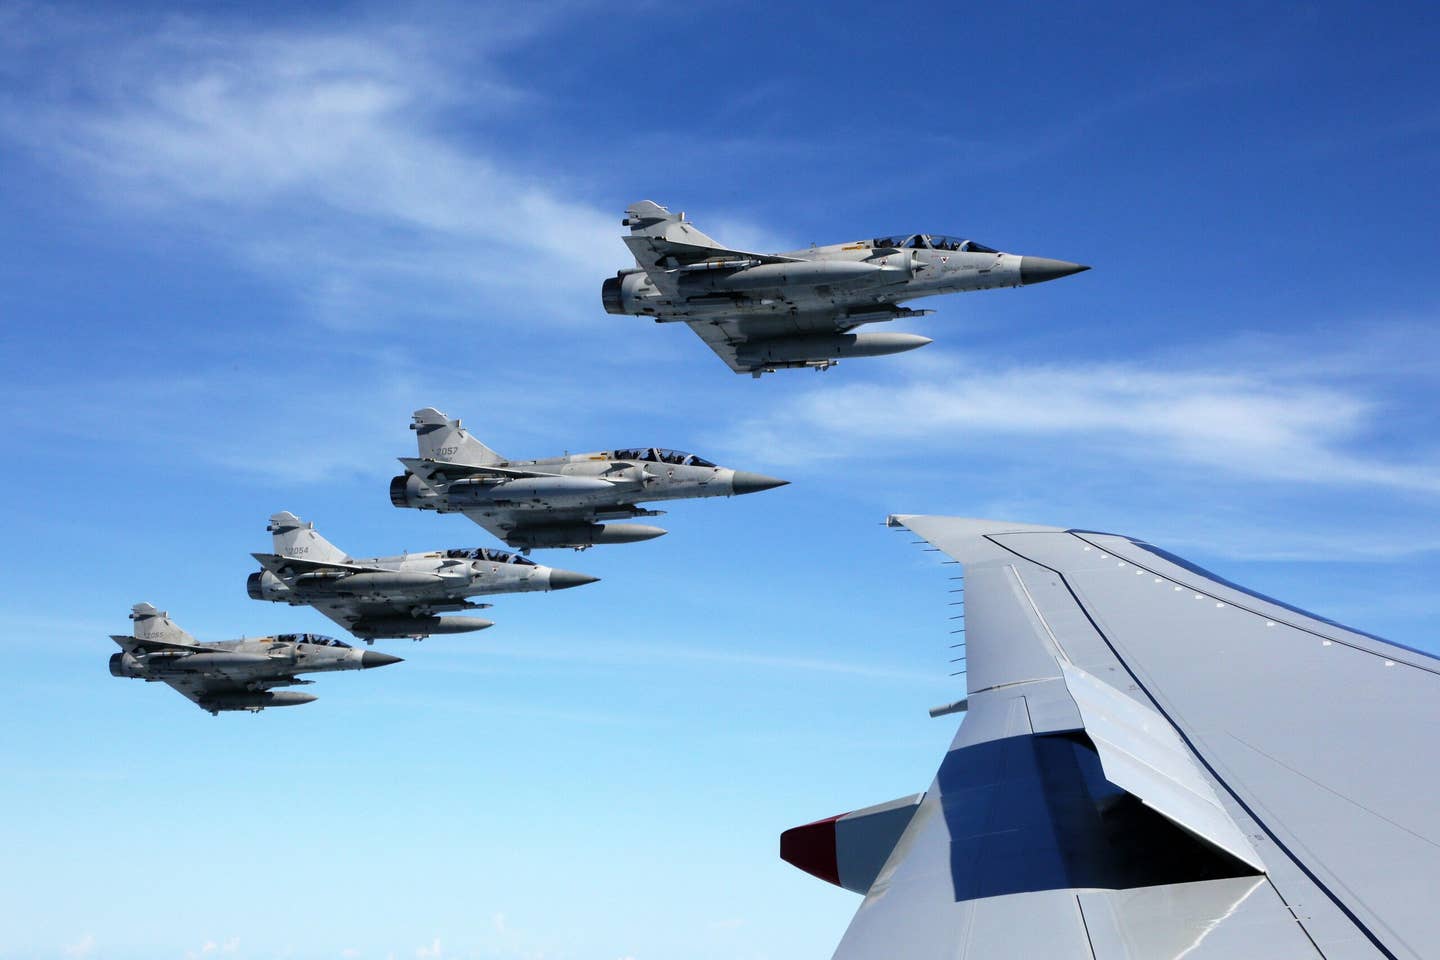 Four armed ROCAF Mirage 2000-5 fighter jets escort President Tsai’s plane as she returns from an overseas trip in 2016. <em>Office of the President, Republic of China</em>